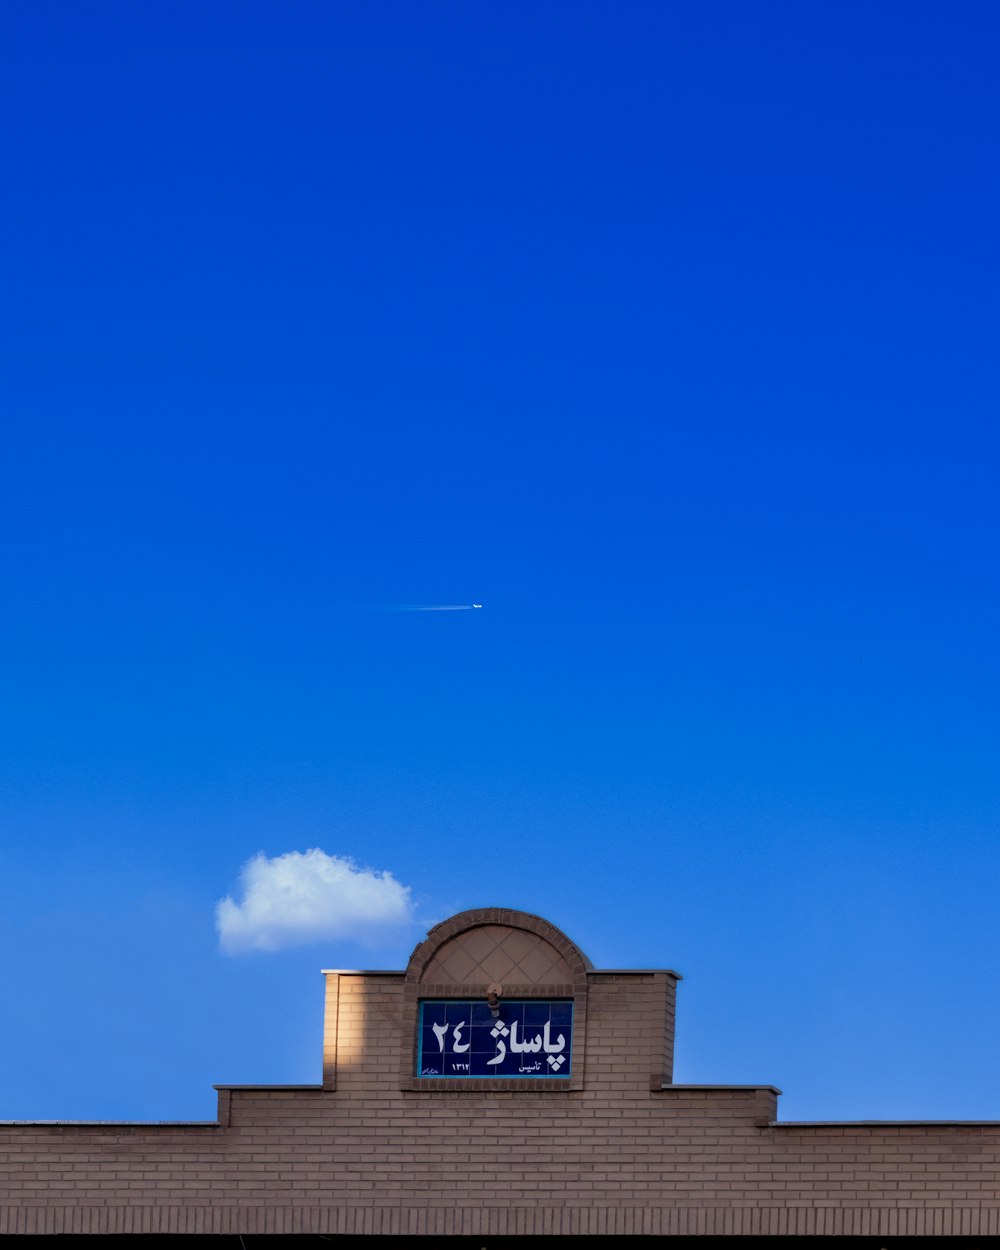 a blue sky with a plane flying in the distance